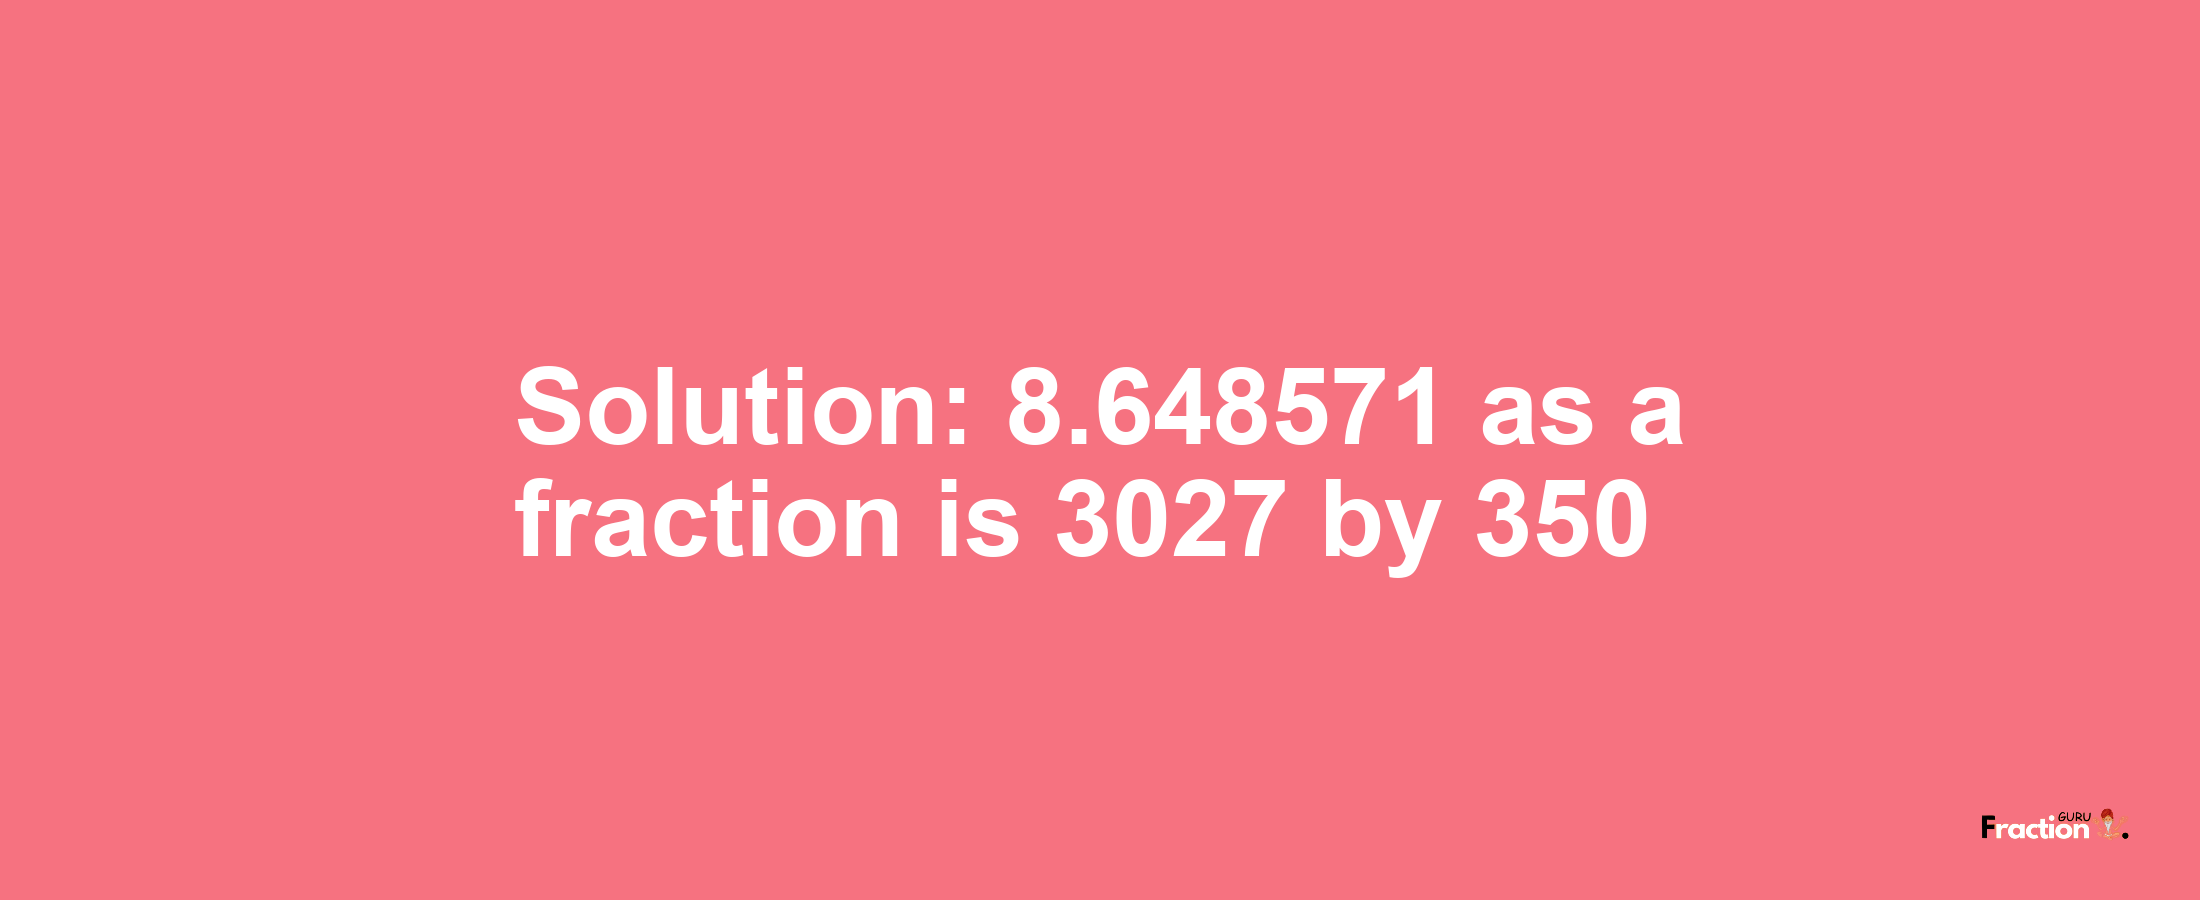 Solution:8.648571 as a fraction is 3027/350